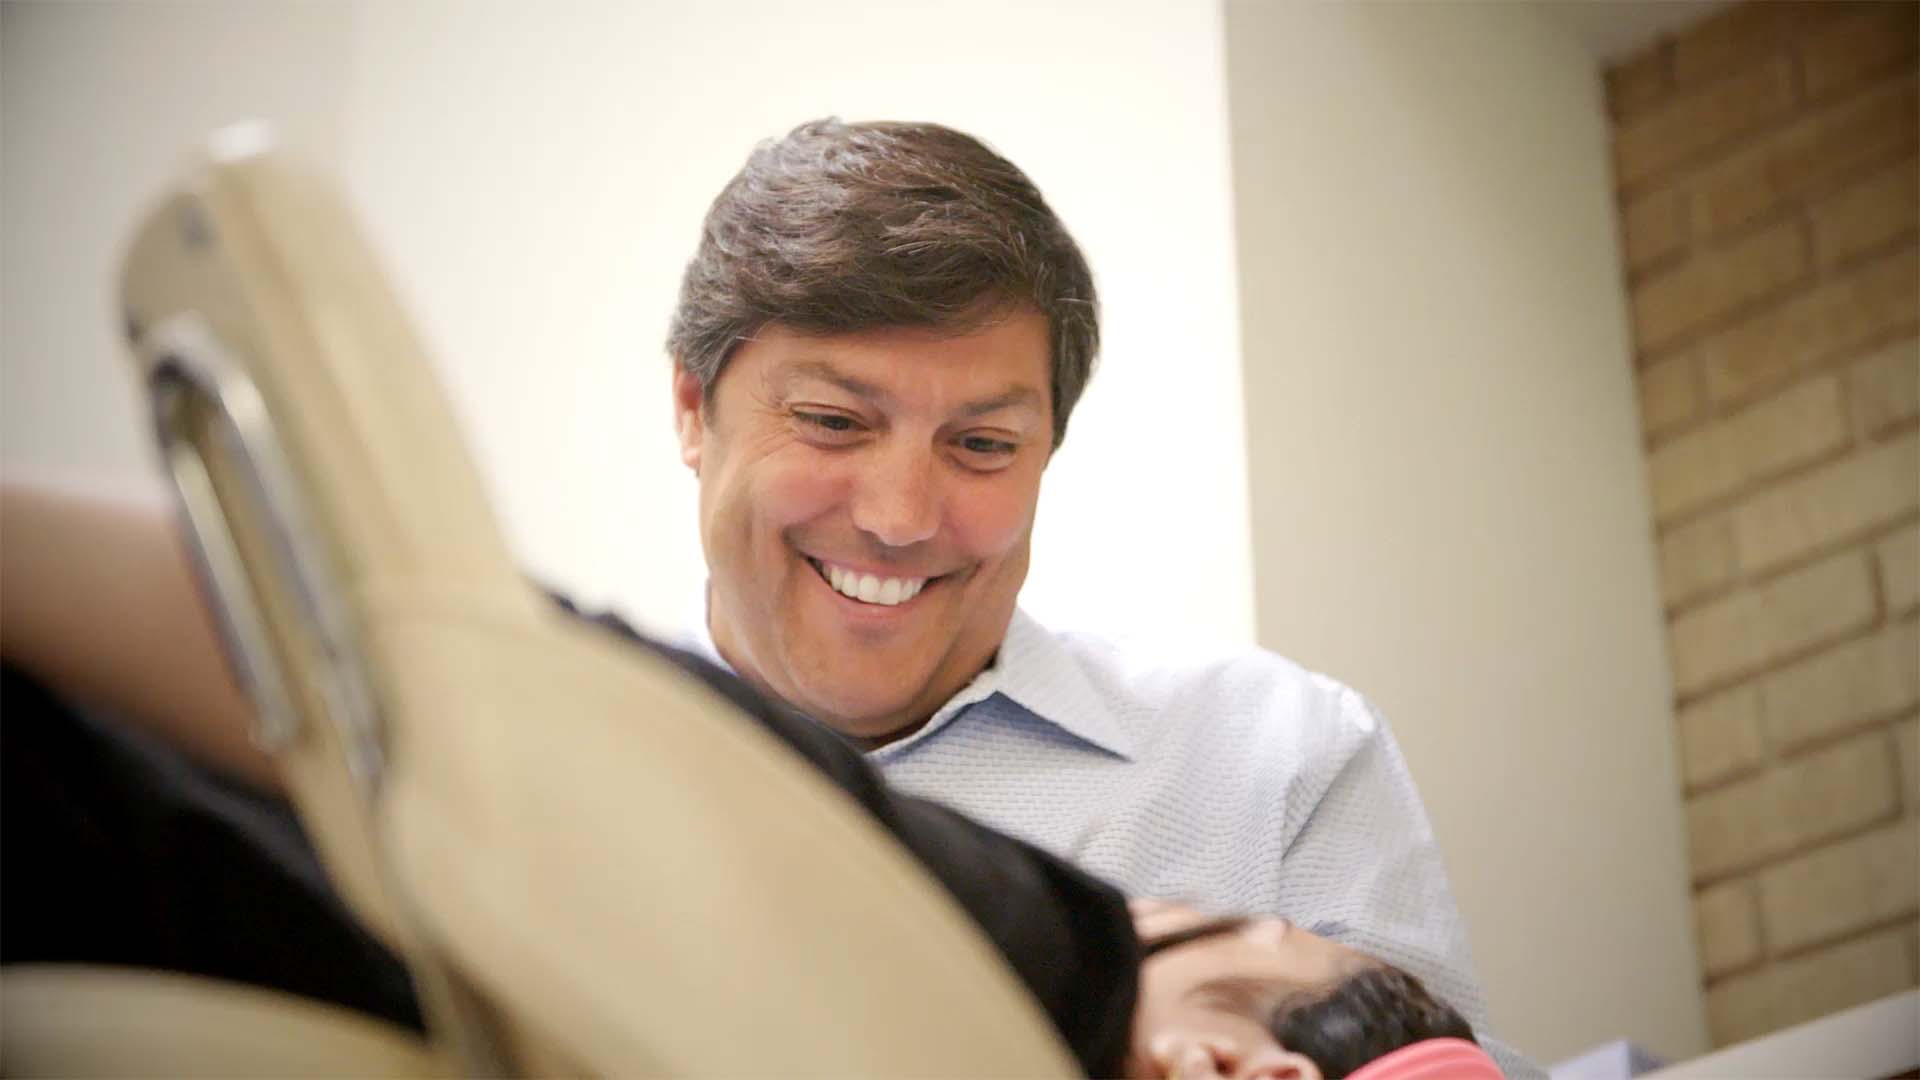 Dr Stefen Lippitz smiles while examining a patient from Glencoe